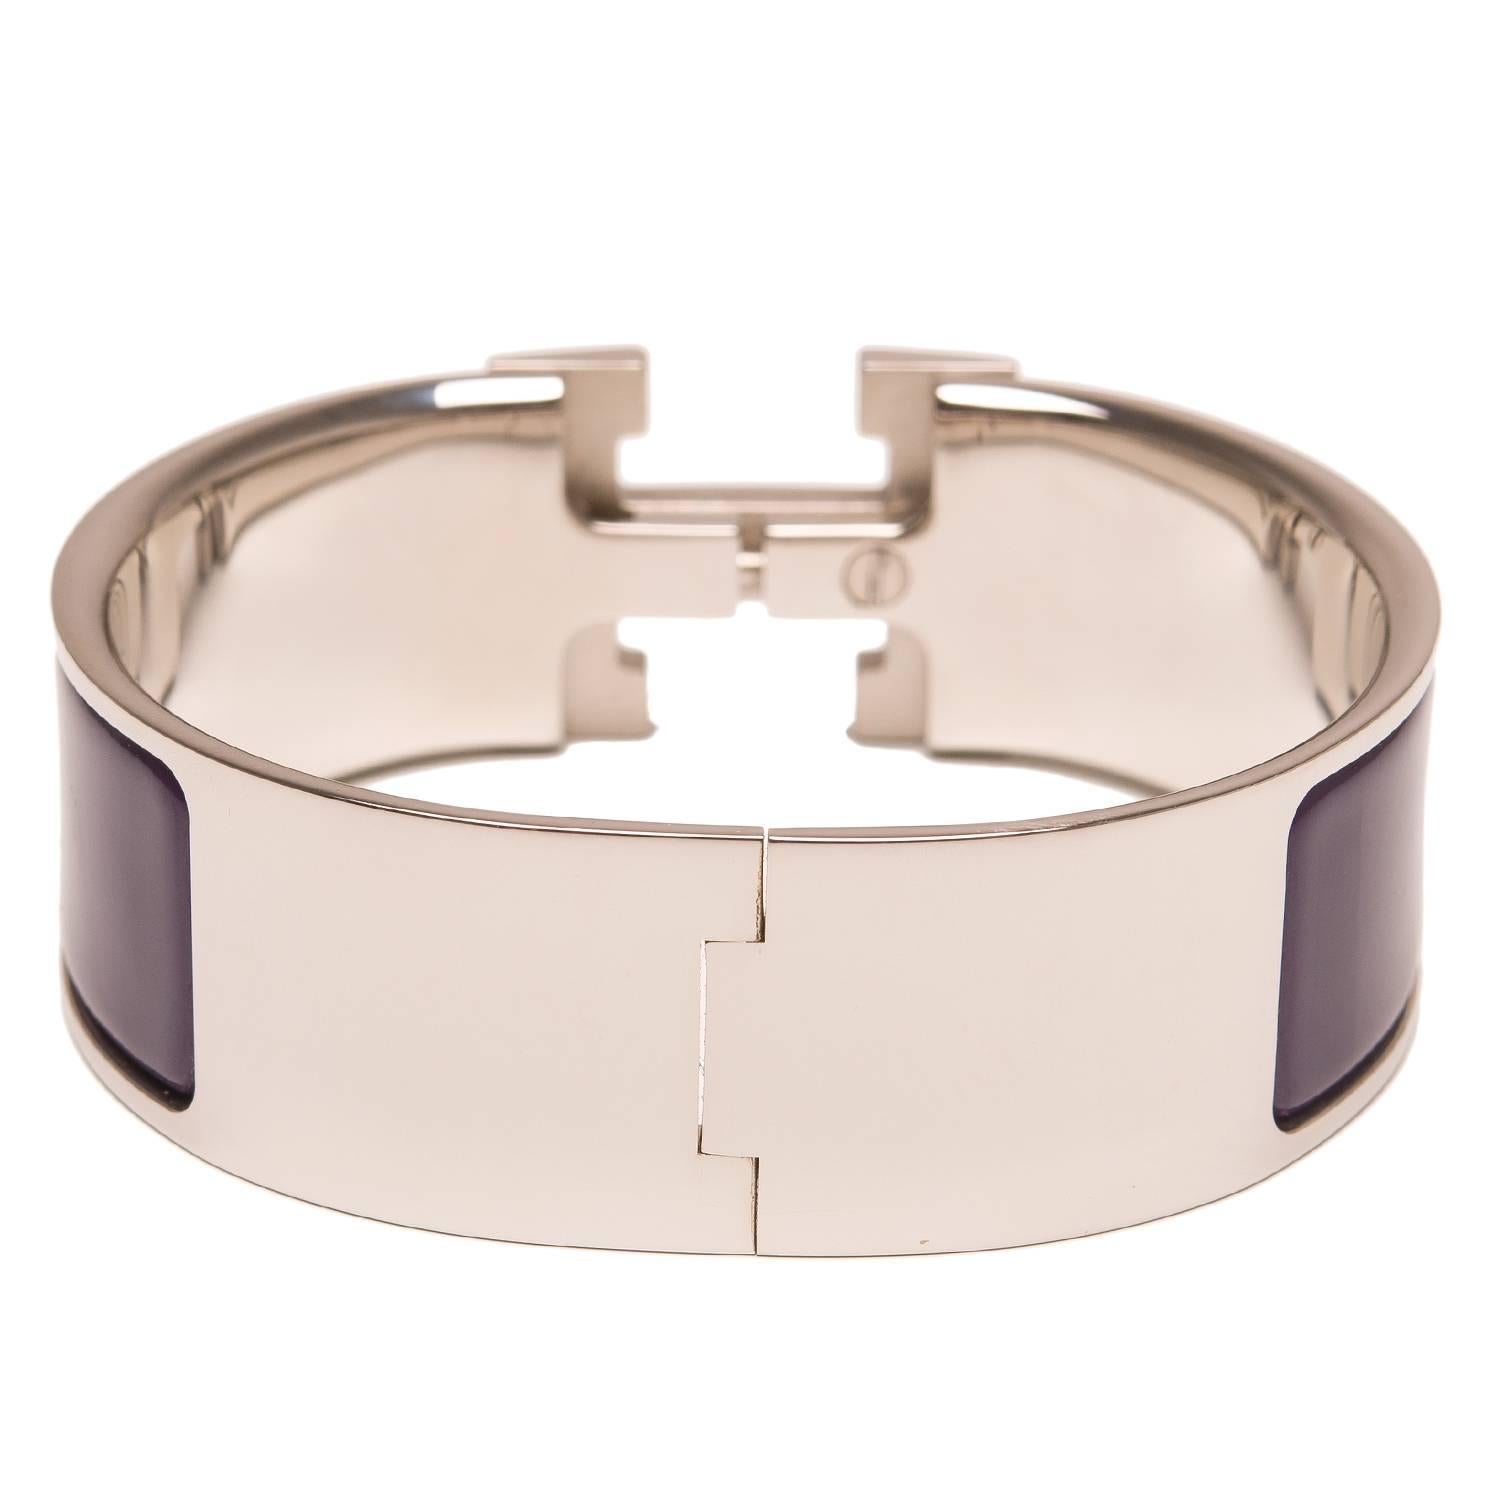 Hermes wide Clic Clac H bracelet in Prune enamel with palladium plated hardware in size PM.

Origin: France

Condition: Never Carried

Accompanied by: Hermes box, Hermes dustbag

Measurements: Diameter: 2.25"; Circumference: 7.5";